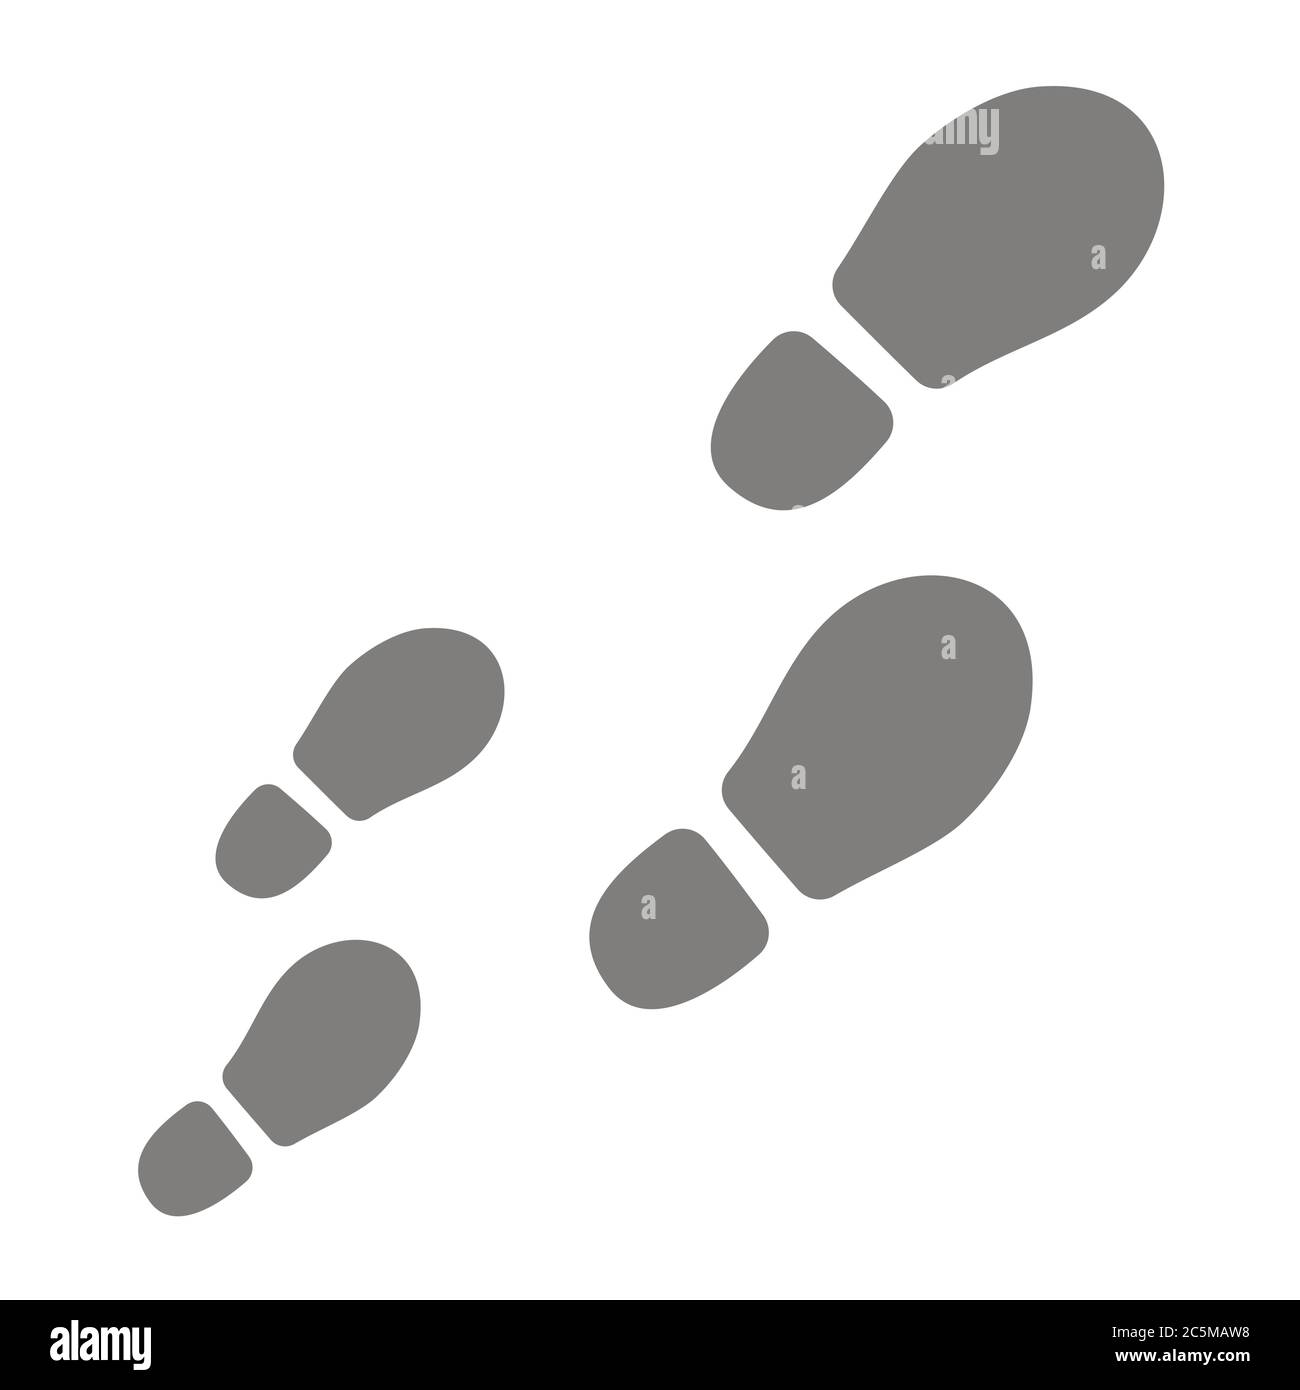 Human foot prints. Vector illustration EPS 10 in trendy flat style isolated. Stock Vector